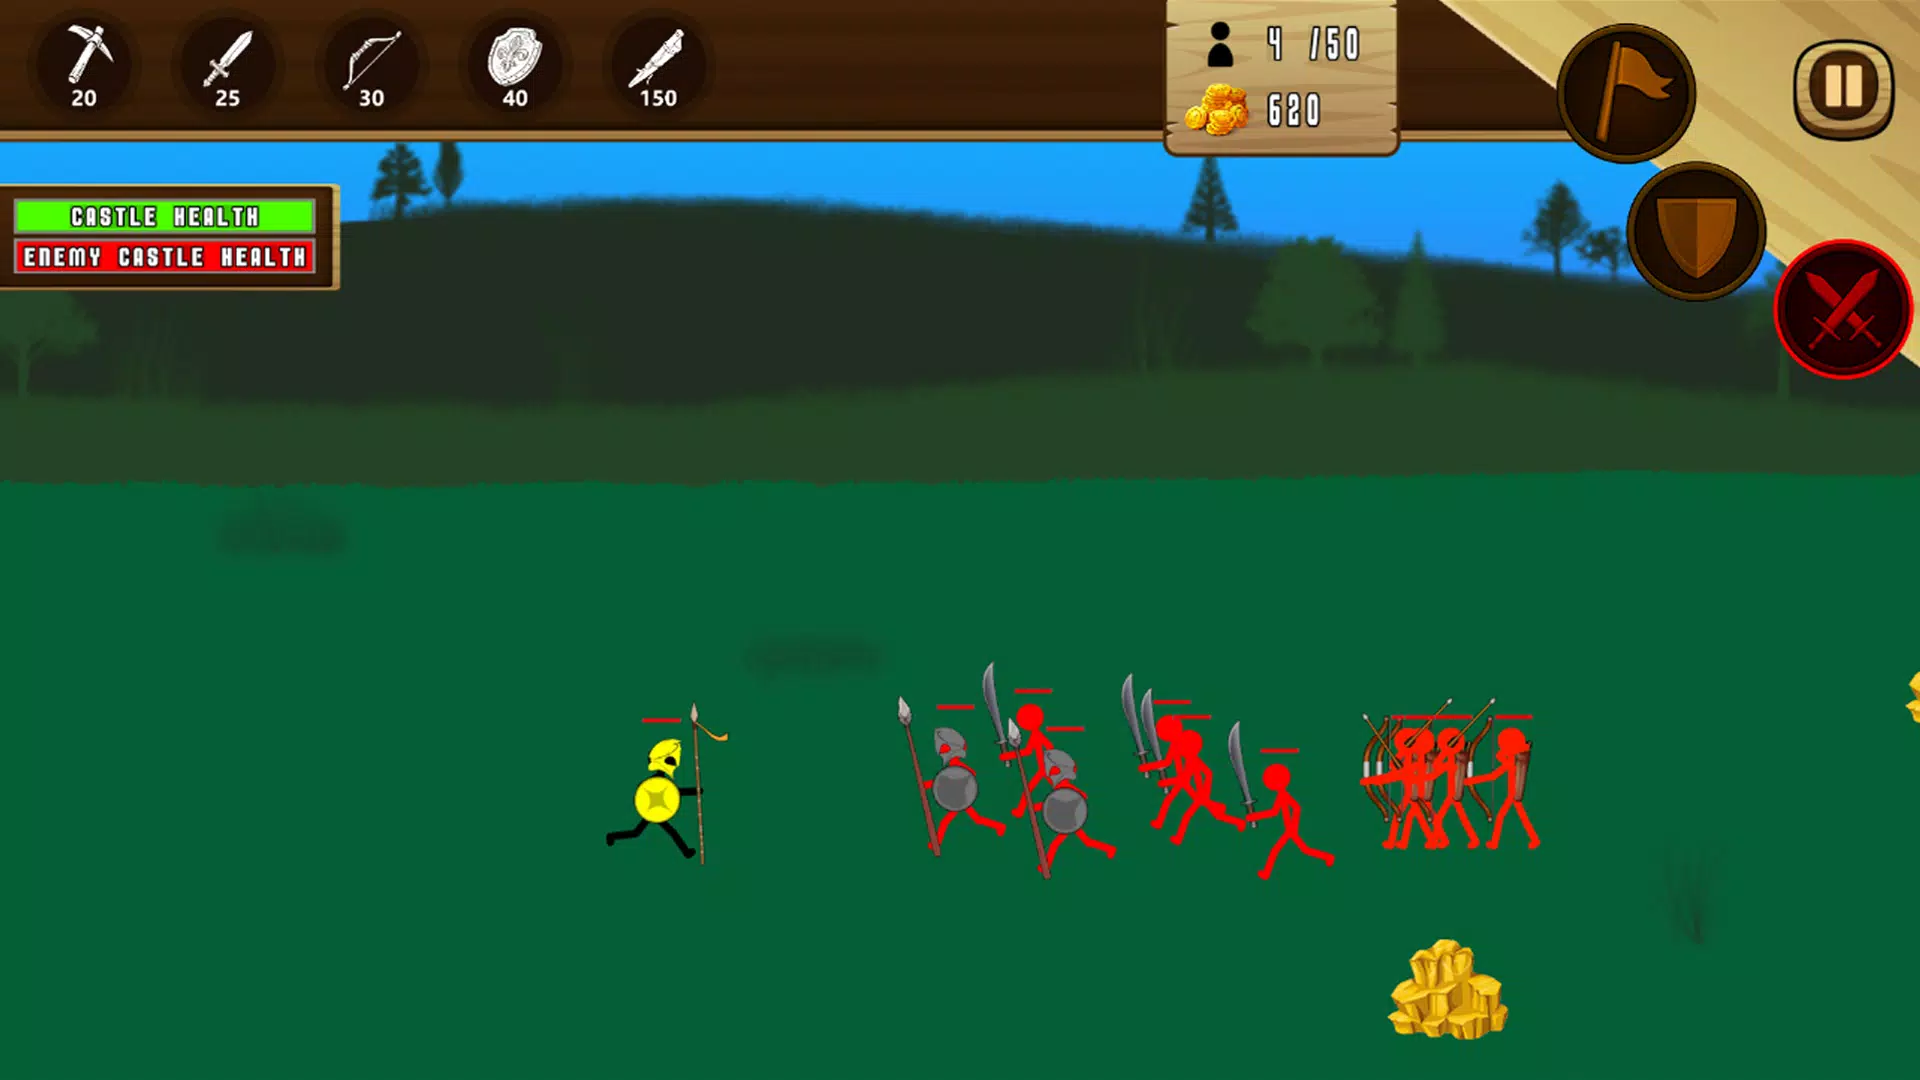 Stickman Fight : War of The Ages - Marble & Ragdoll battle 